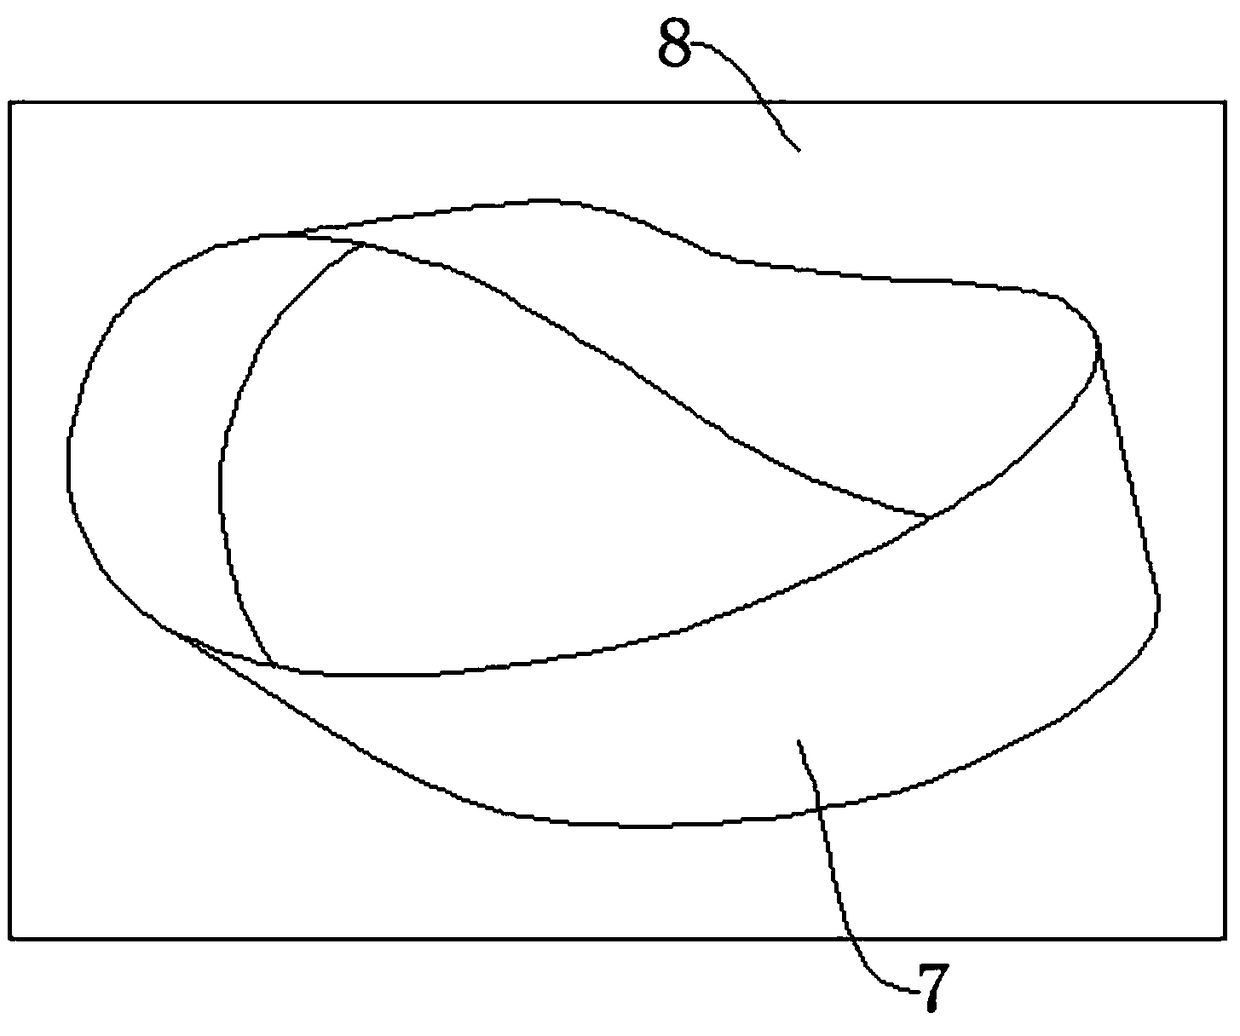 Blade design and manufacturing method of Mobius strip plastic blade wind-driven generator